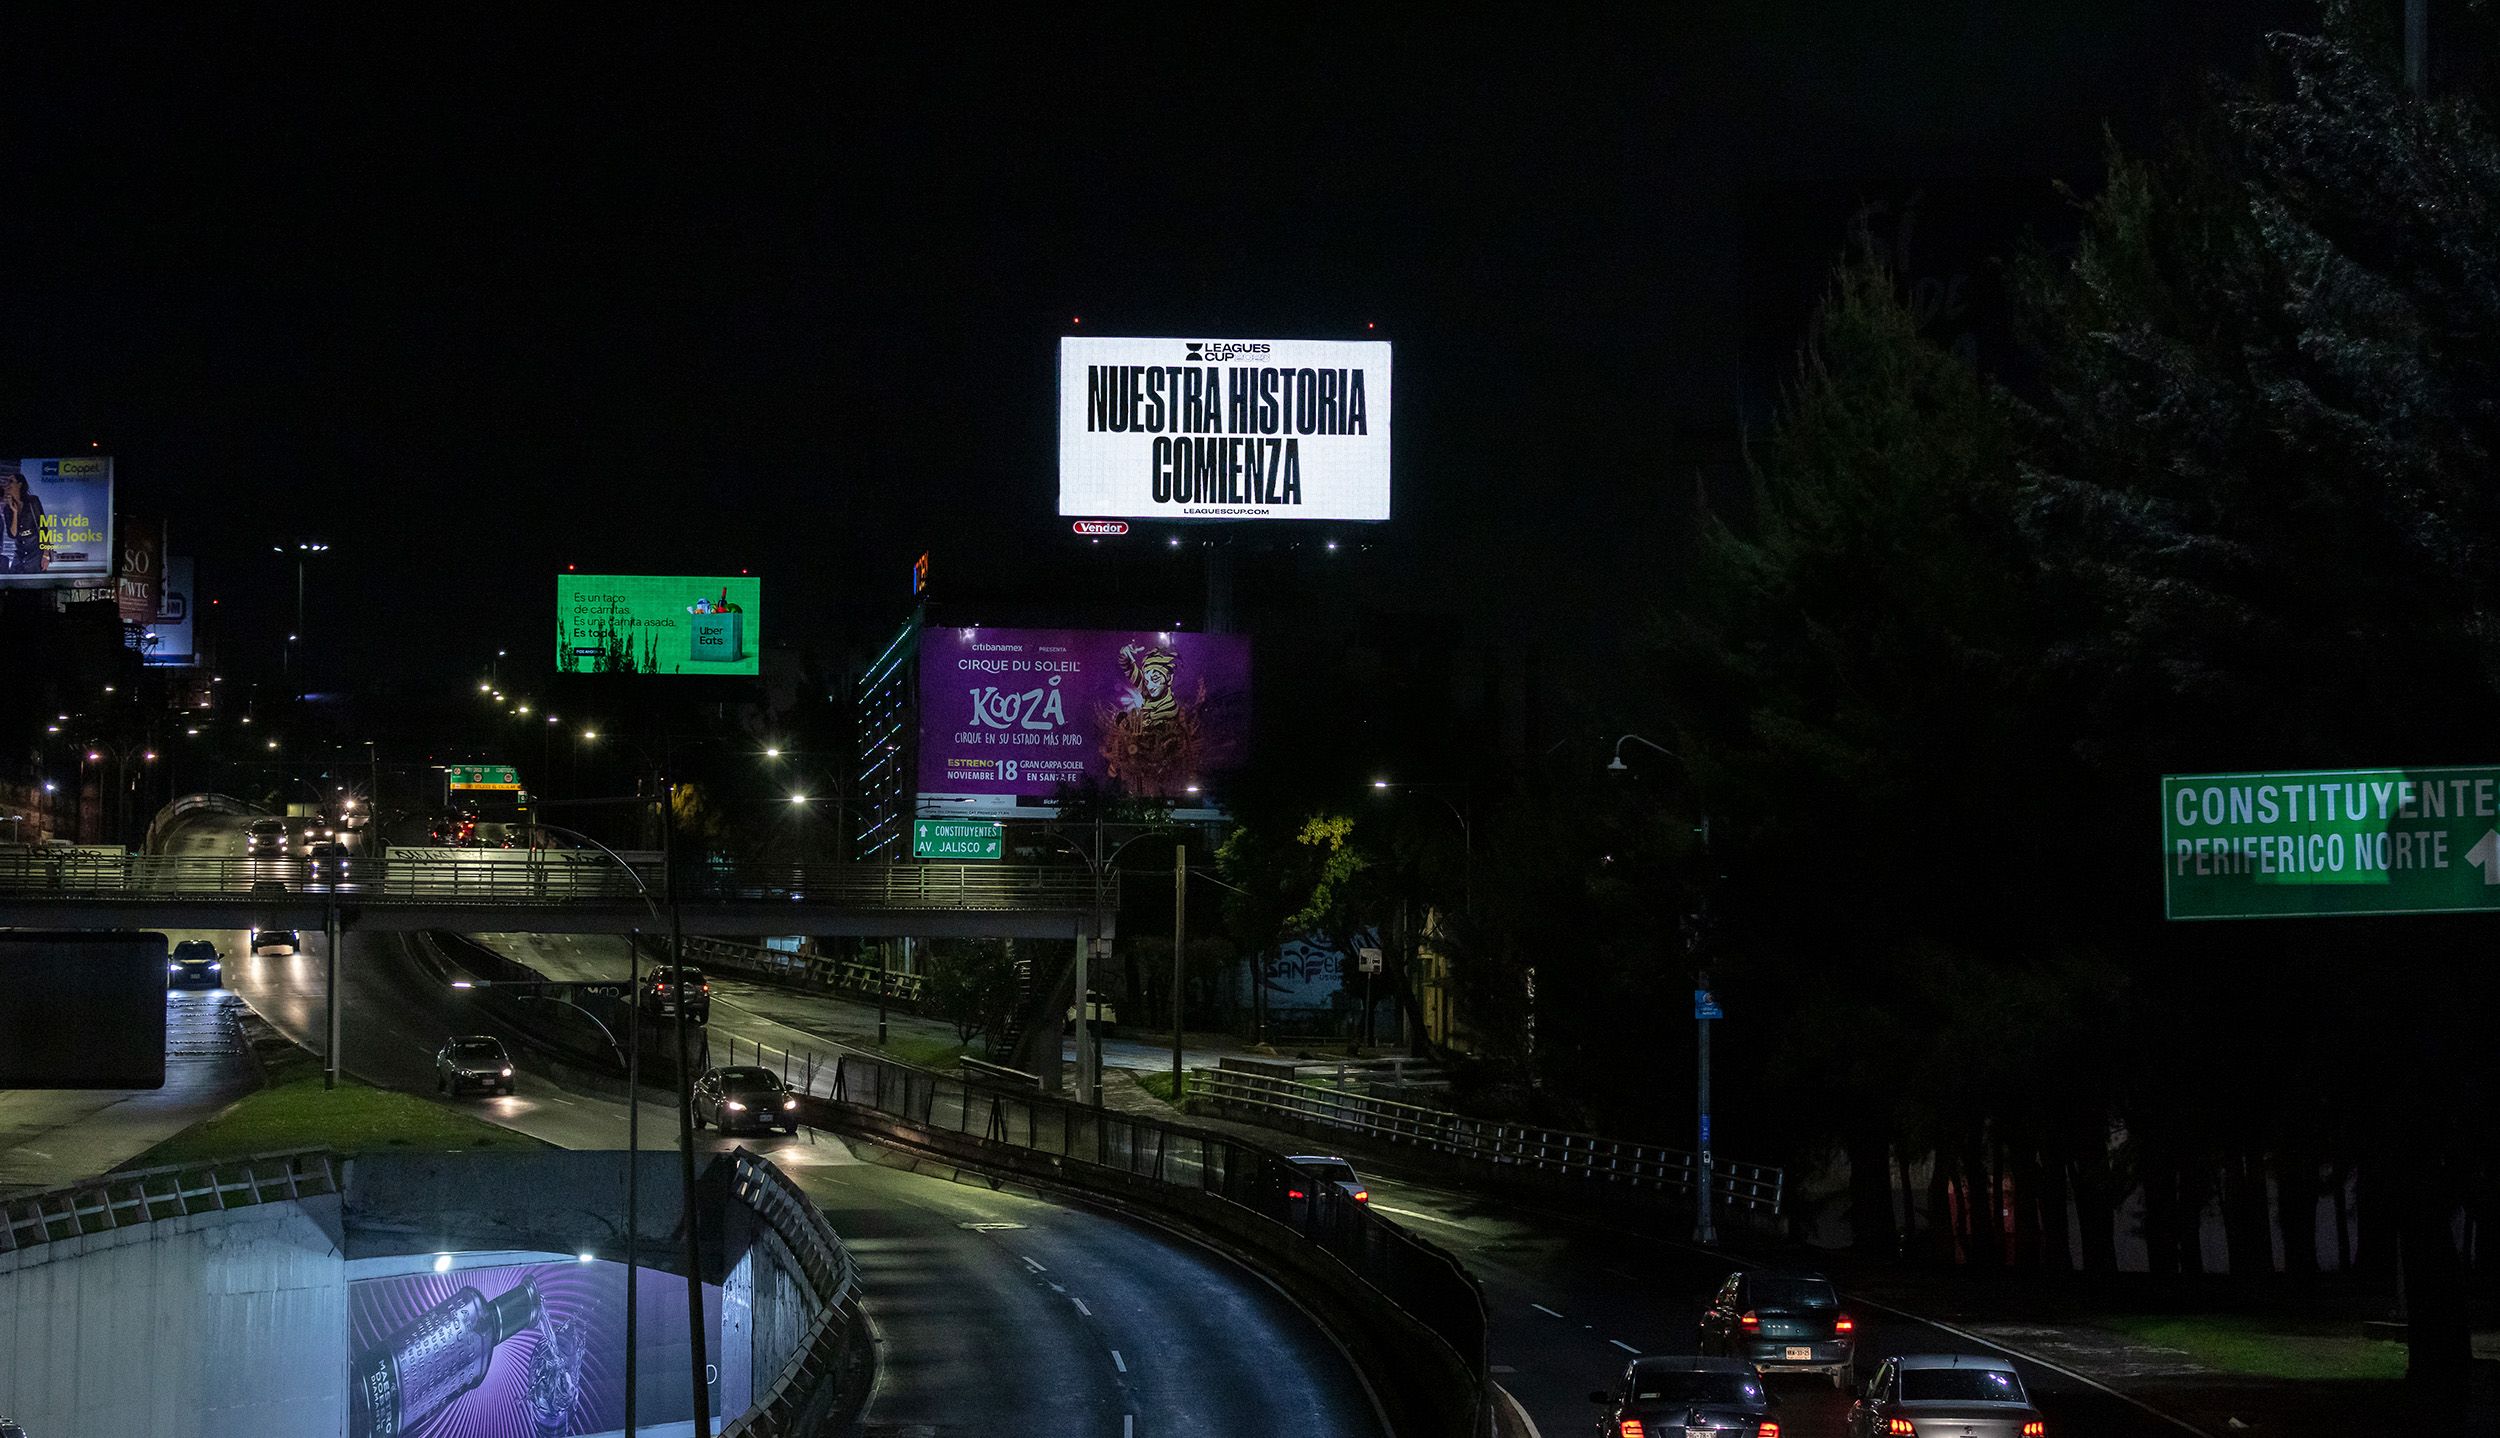 Nuestra Historia Comenza light up billboard over a highway at night in Mexico